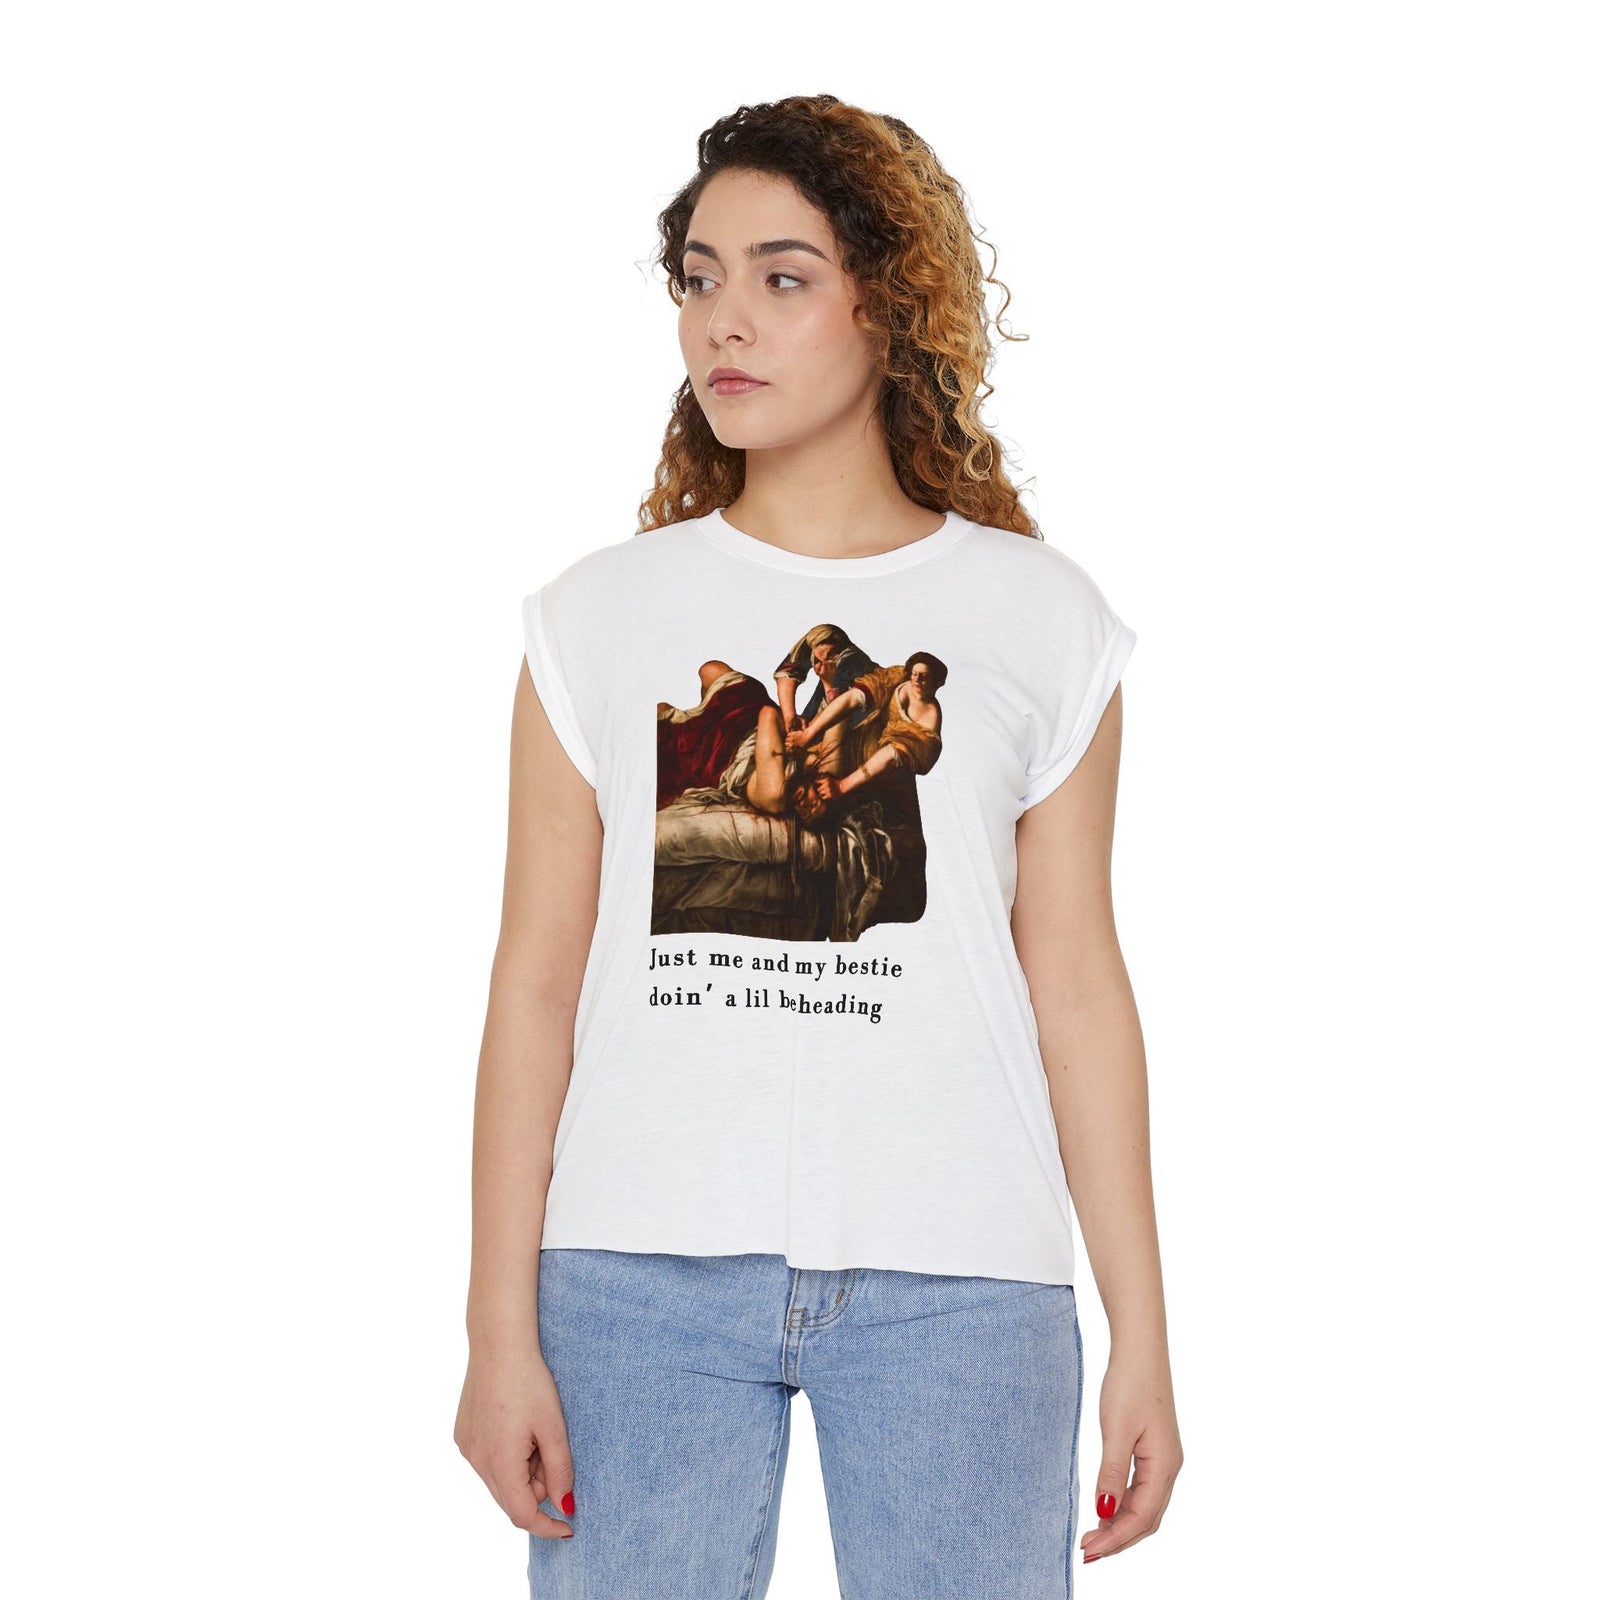 Besties Doing a Nice Beheading! Judith Slaying Holofernes Women’s Flowy Rolled Cuffs Muscle Tee Shirt